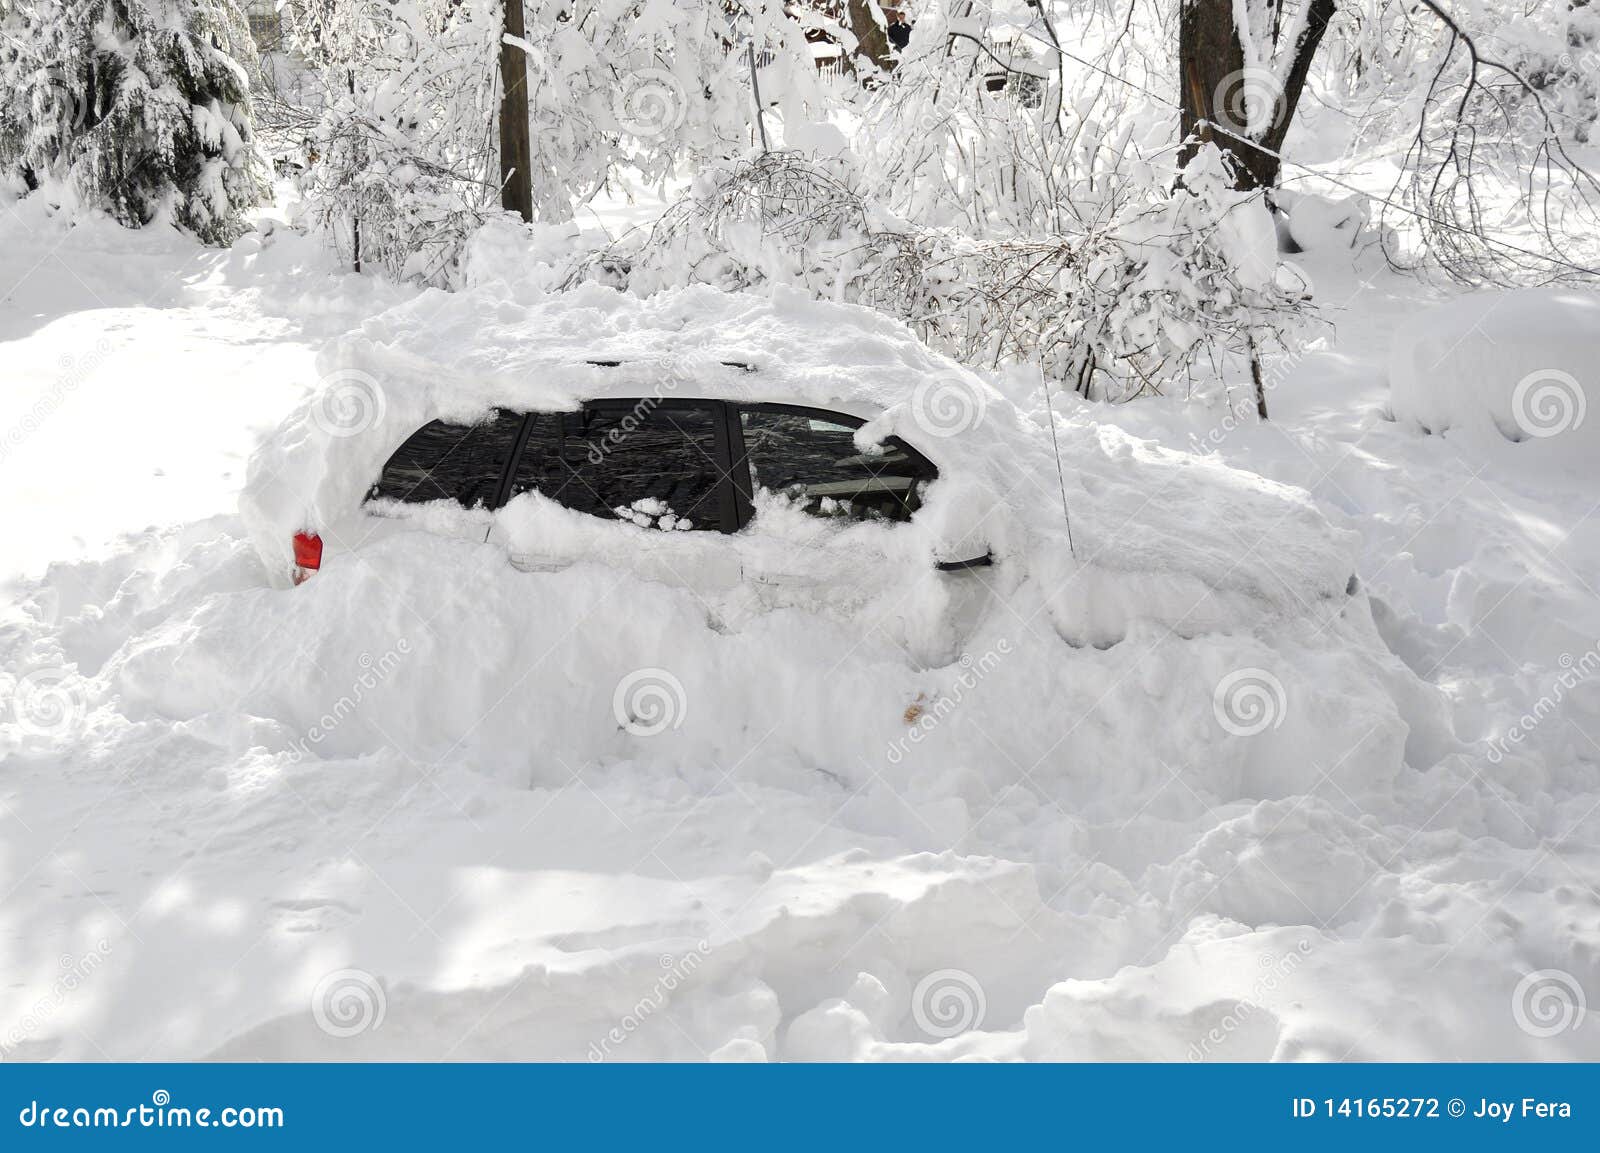 clipart car stuck in snow - photo #8